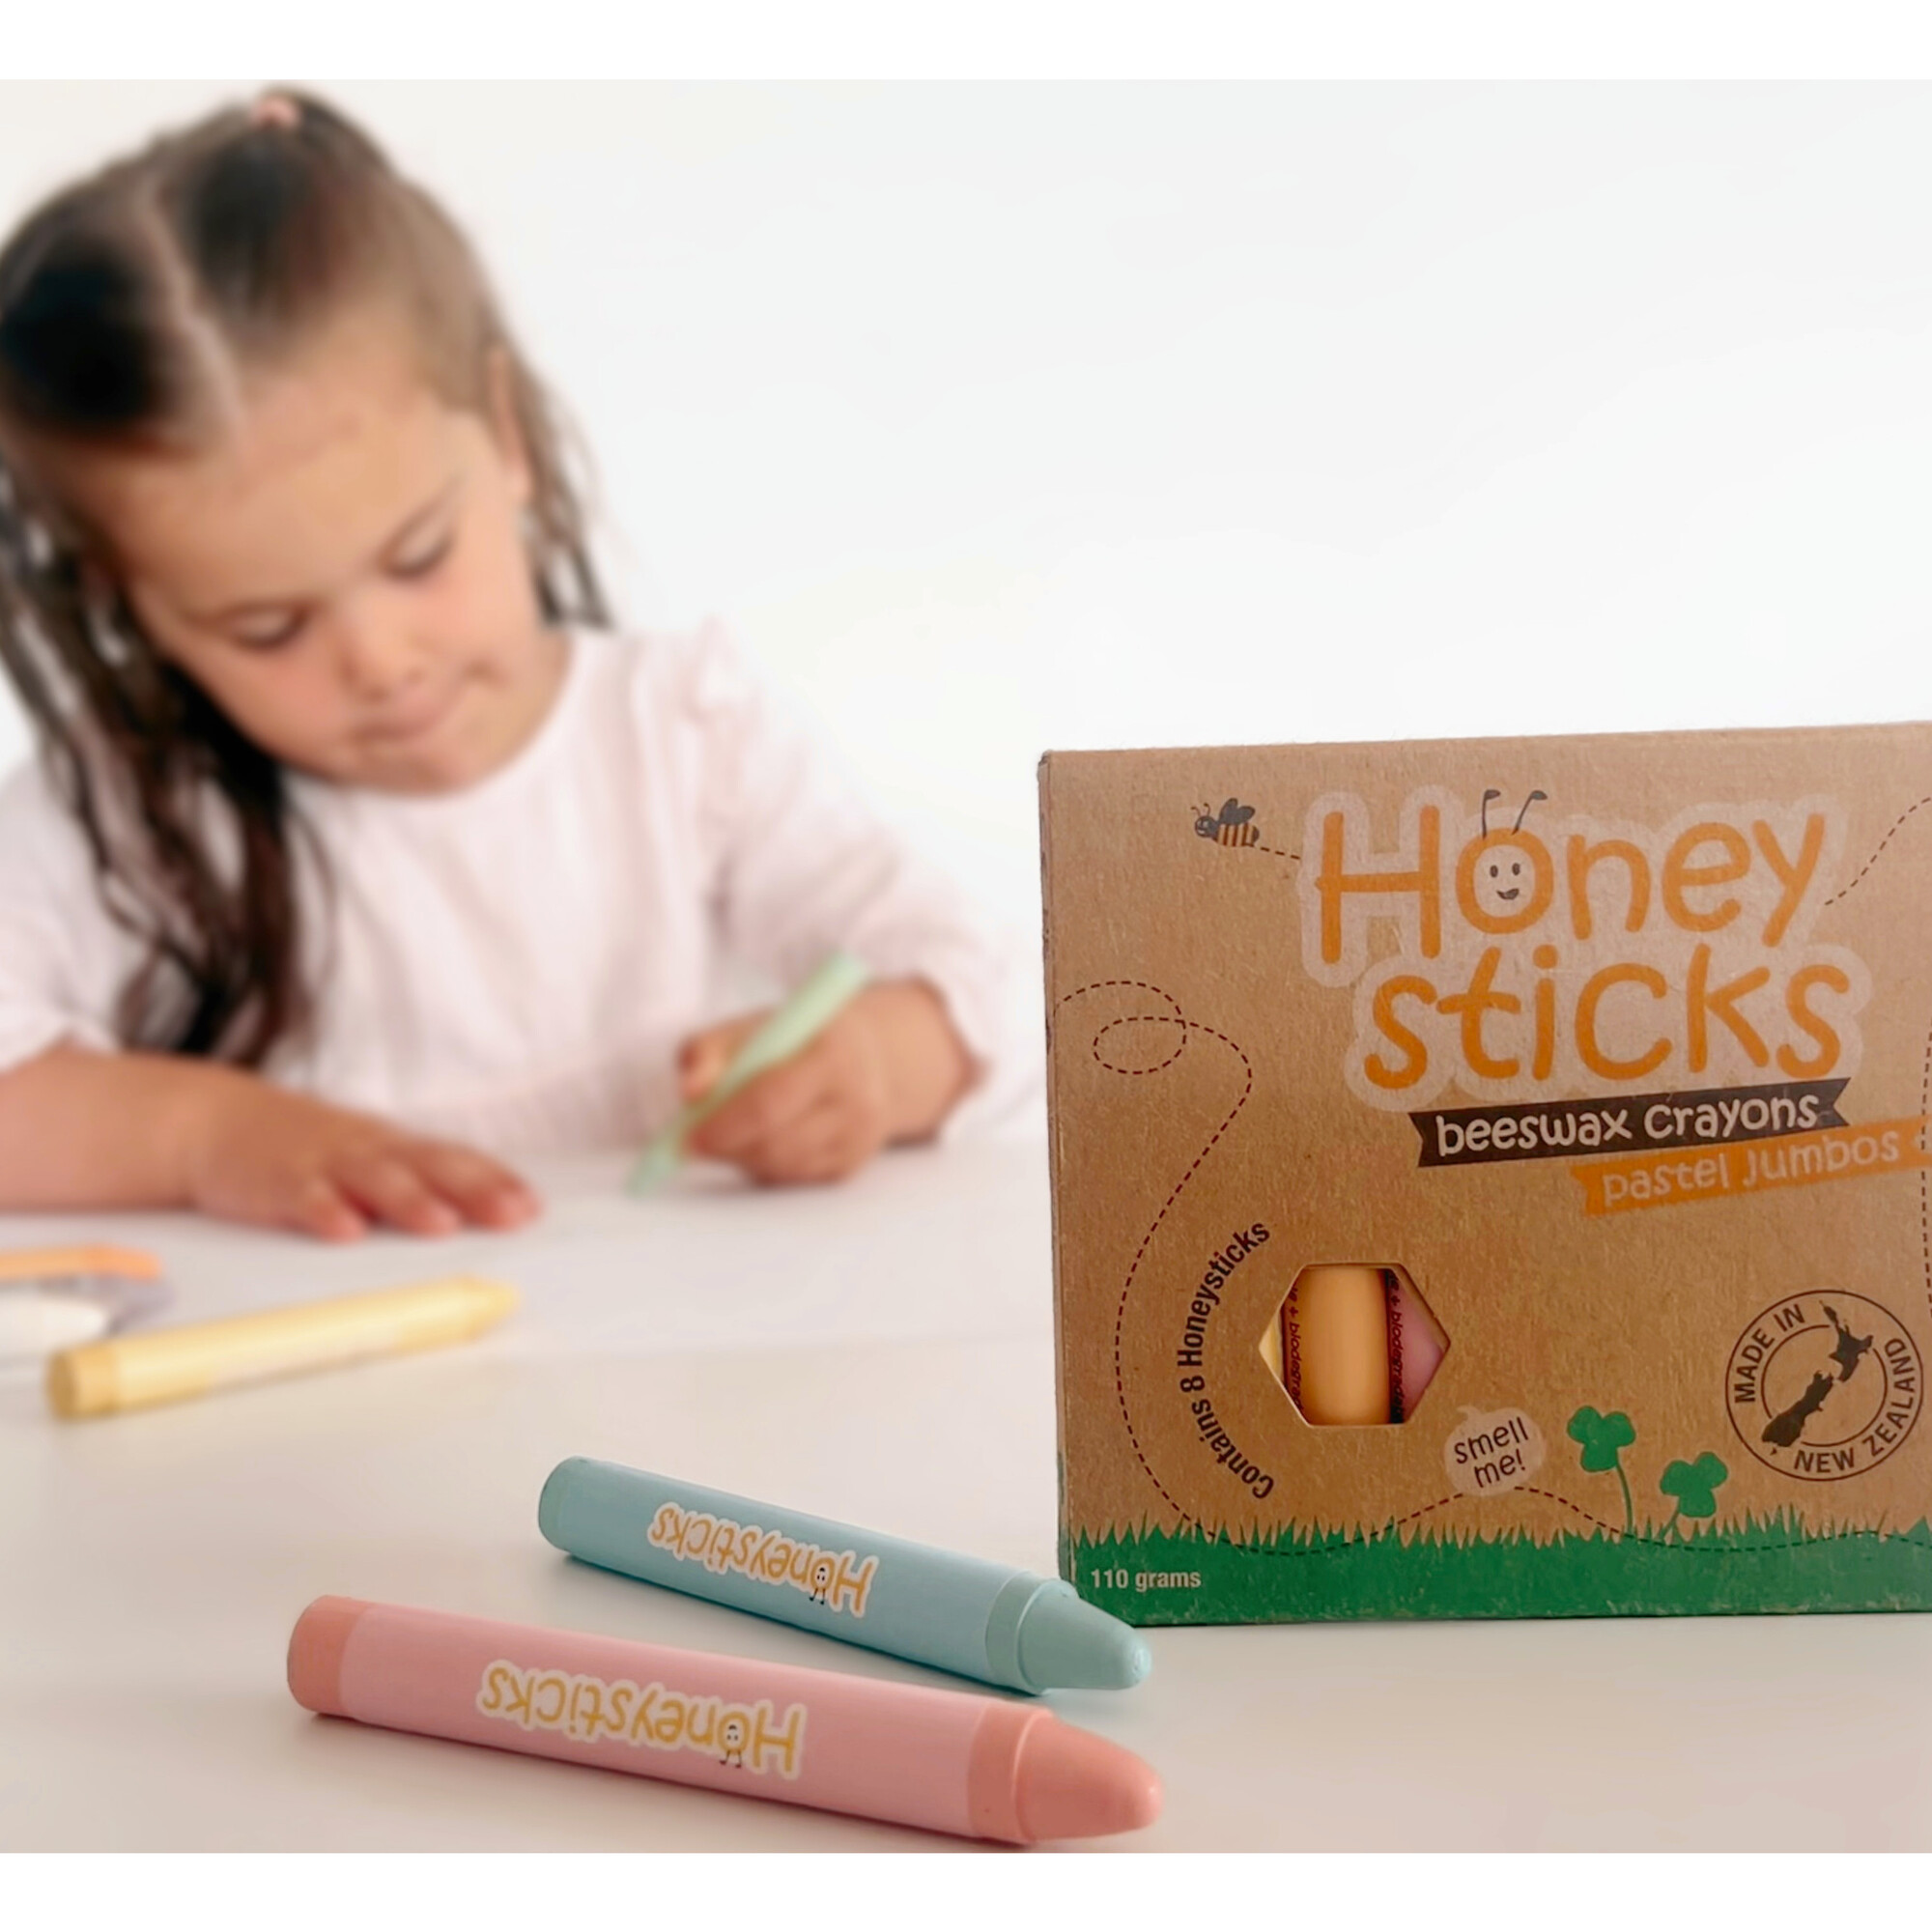 Honeysticks Jumbo Crayons (8 Pack) - Pastel Colors - Non Toxic Crayons for  Kids - 100% Pure Beeswax, Food Grade Colors - Large Crayons, Easy to Hold